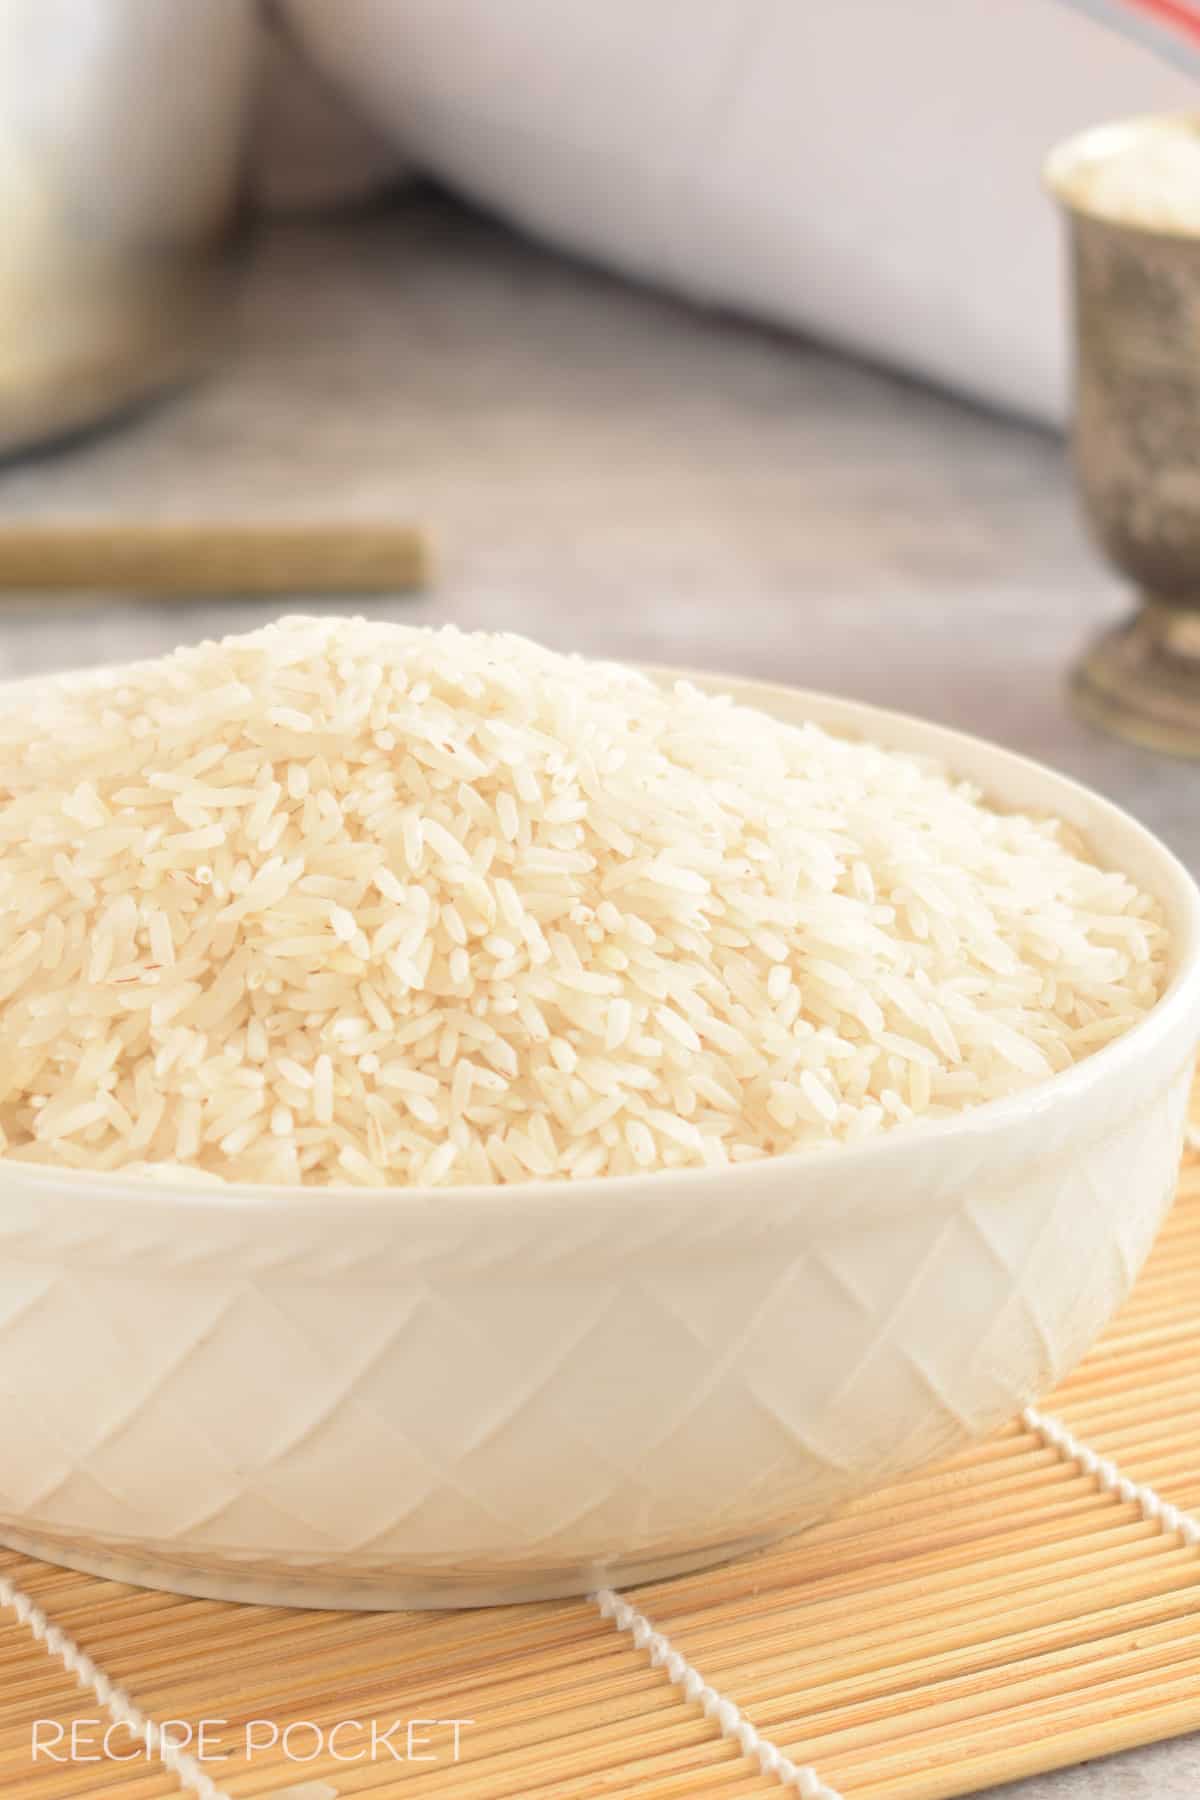 A bowl filled with uncooked basmati rice with a rice bag in the background.